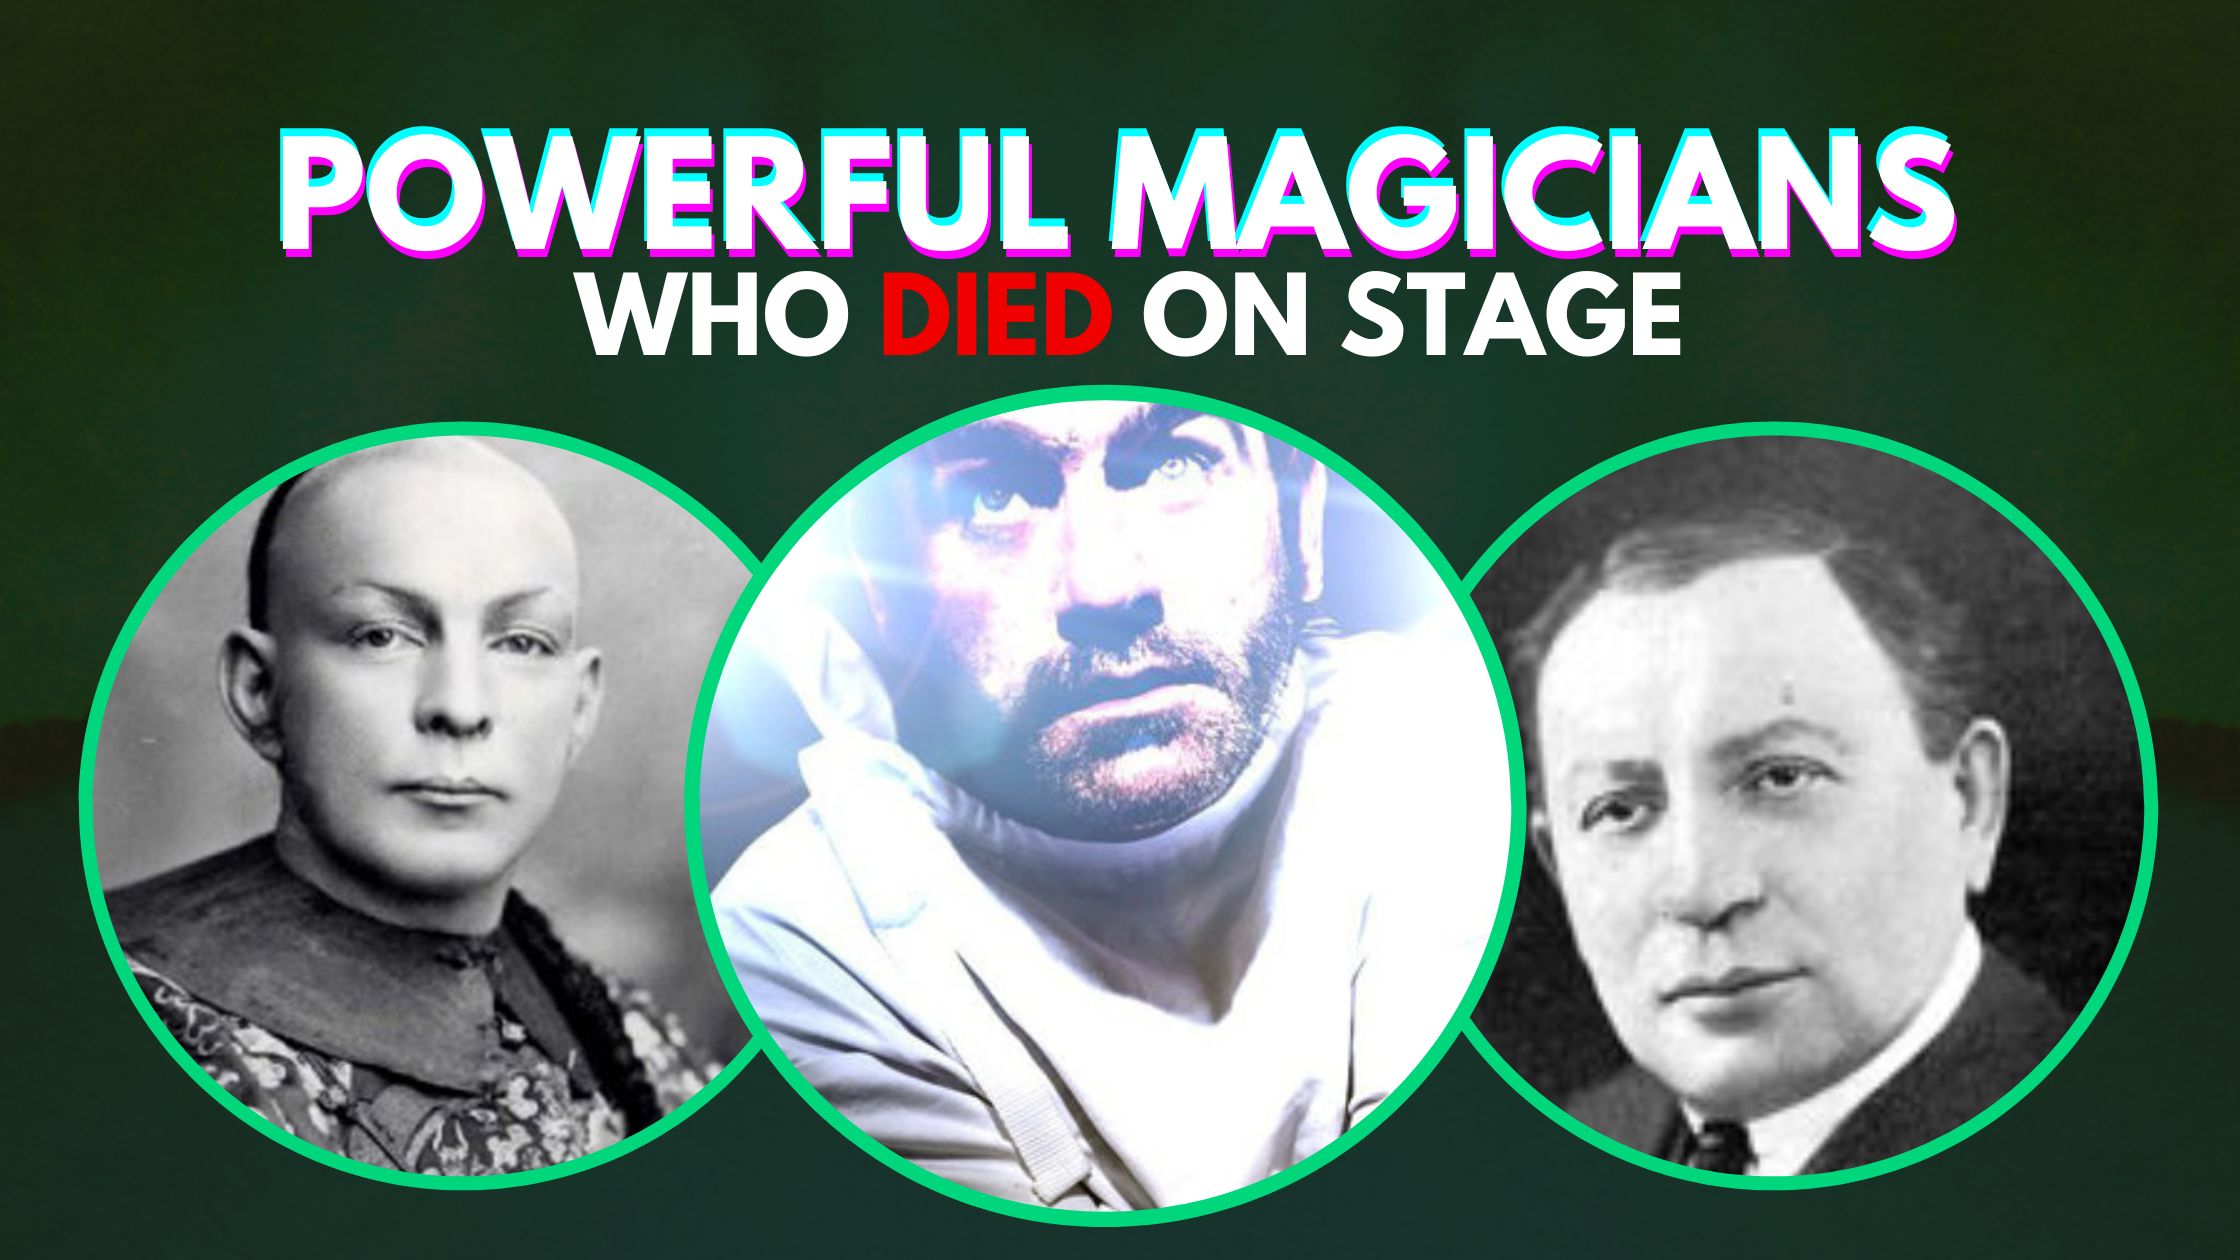 Powerful Magicians Who Died on Stage